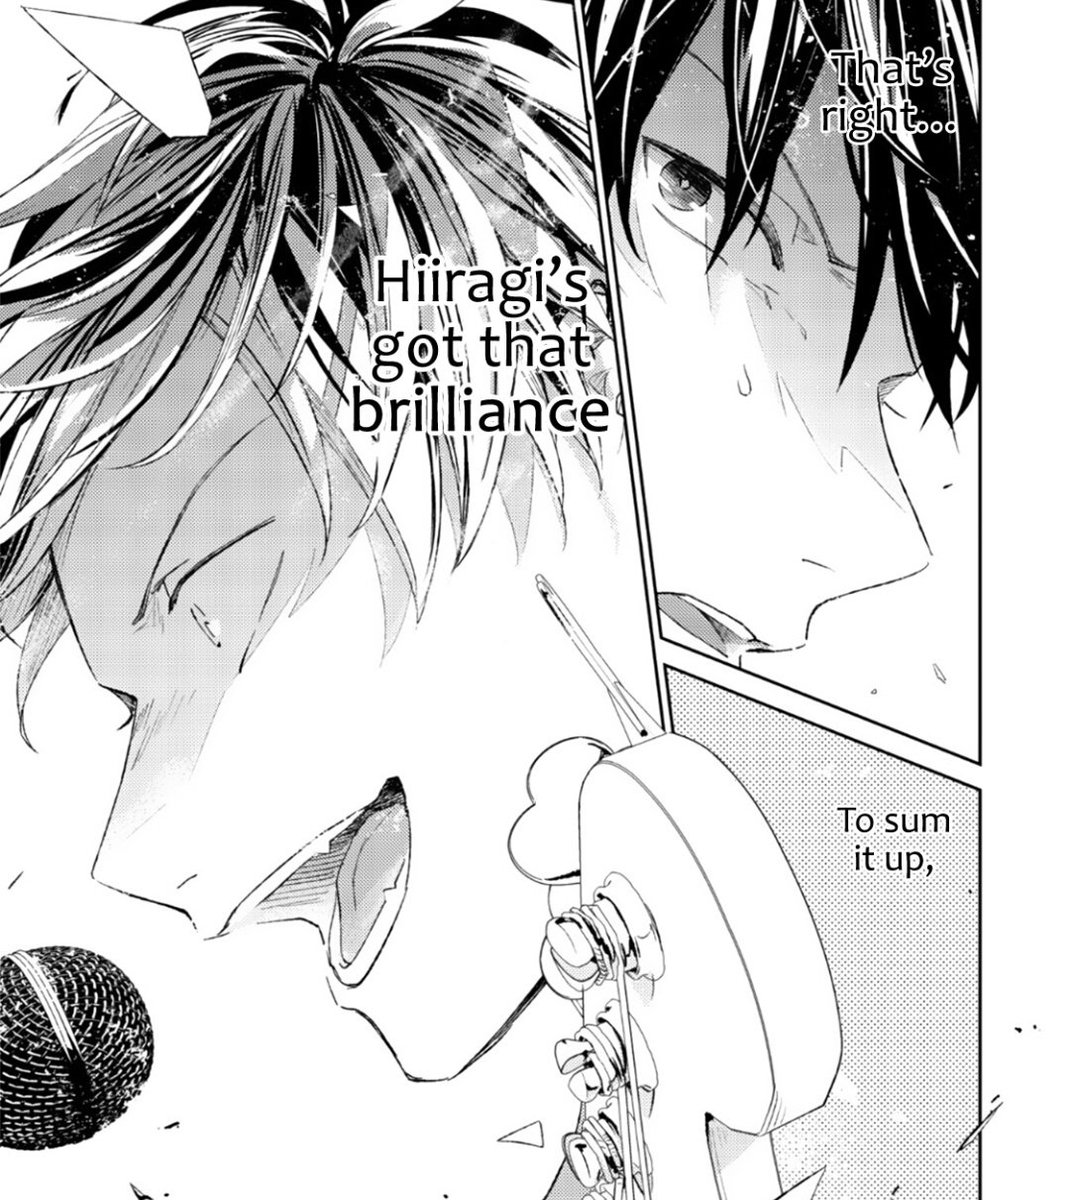 +neither Ritsuka, or Mafuyu, but he thinks of Yuki as perfect. I am sure we'll see the coming chapters just how extraordinary Yuki really was but listening to Hiiragi go on about Yuki's brilliance and then being challenged to finish his song obviously put a lot of pressure on+